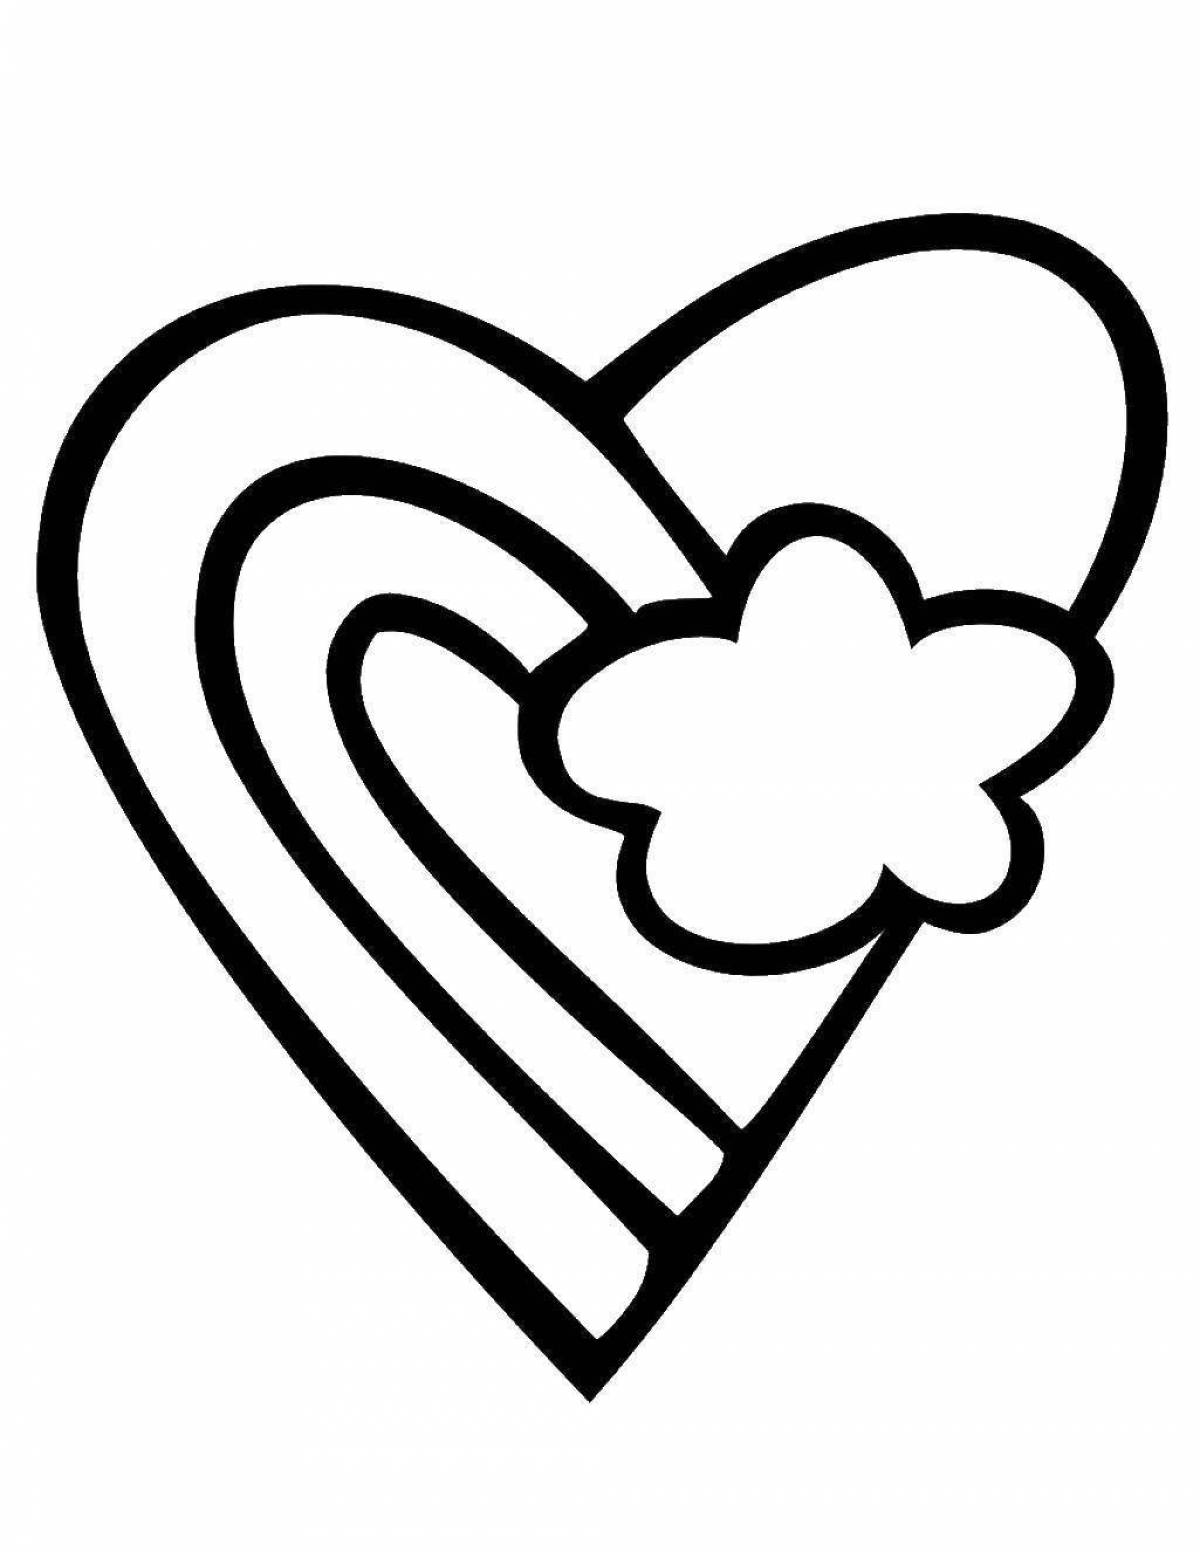 Blissful coloring pages with hearts